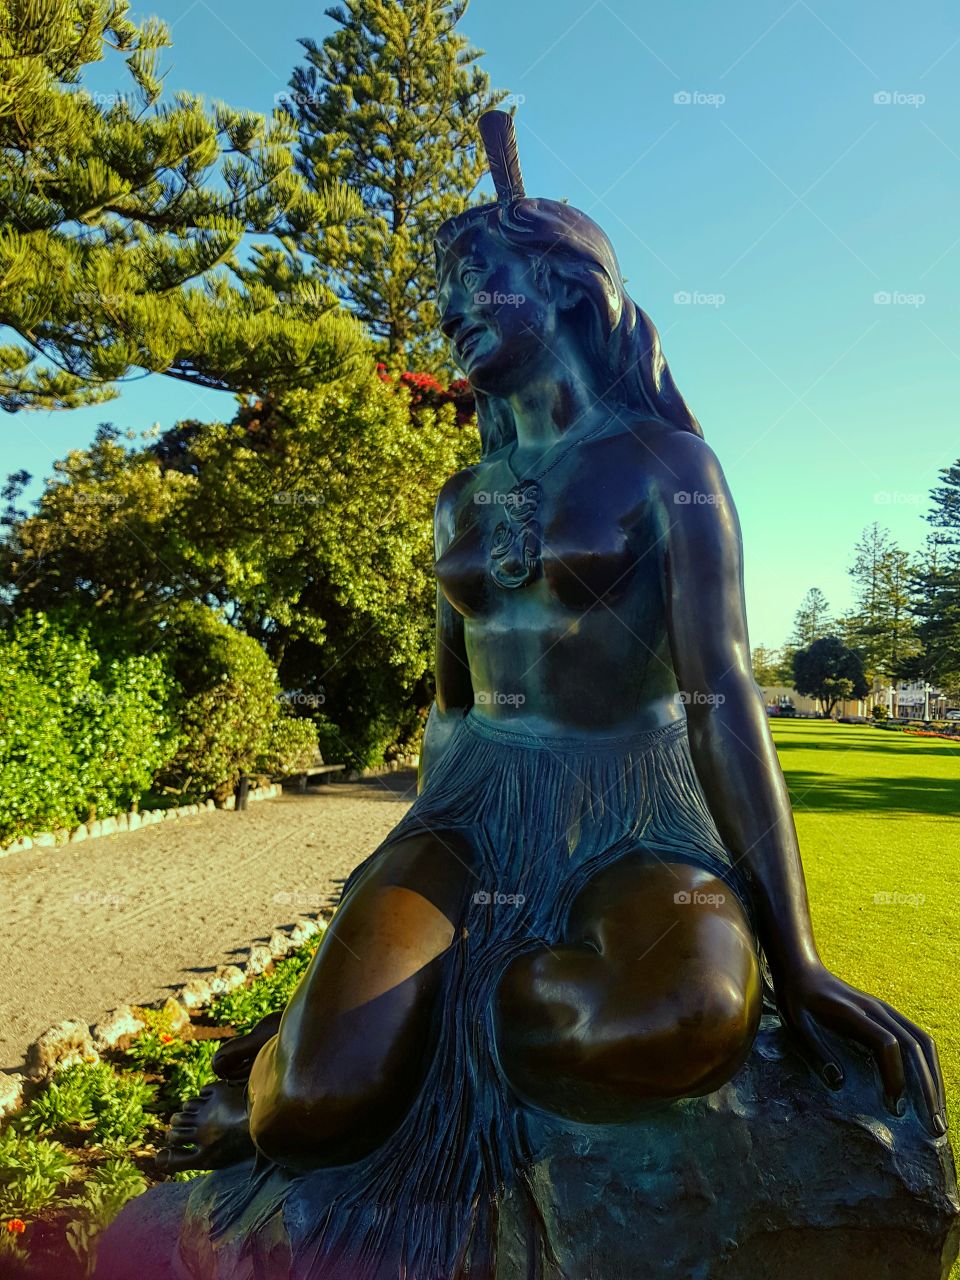 Pania of the reef. This bronze statue of a maori woman sits on Napier's marine parade. Forever looking out to sea. (Google to read the story behind Pania of the reef Maori legends).